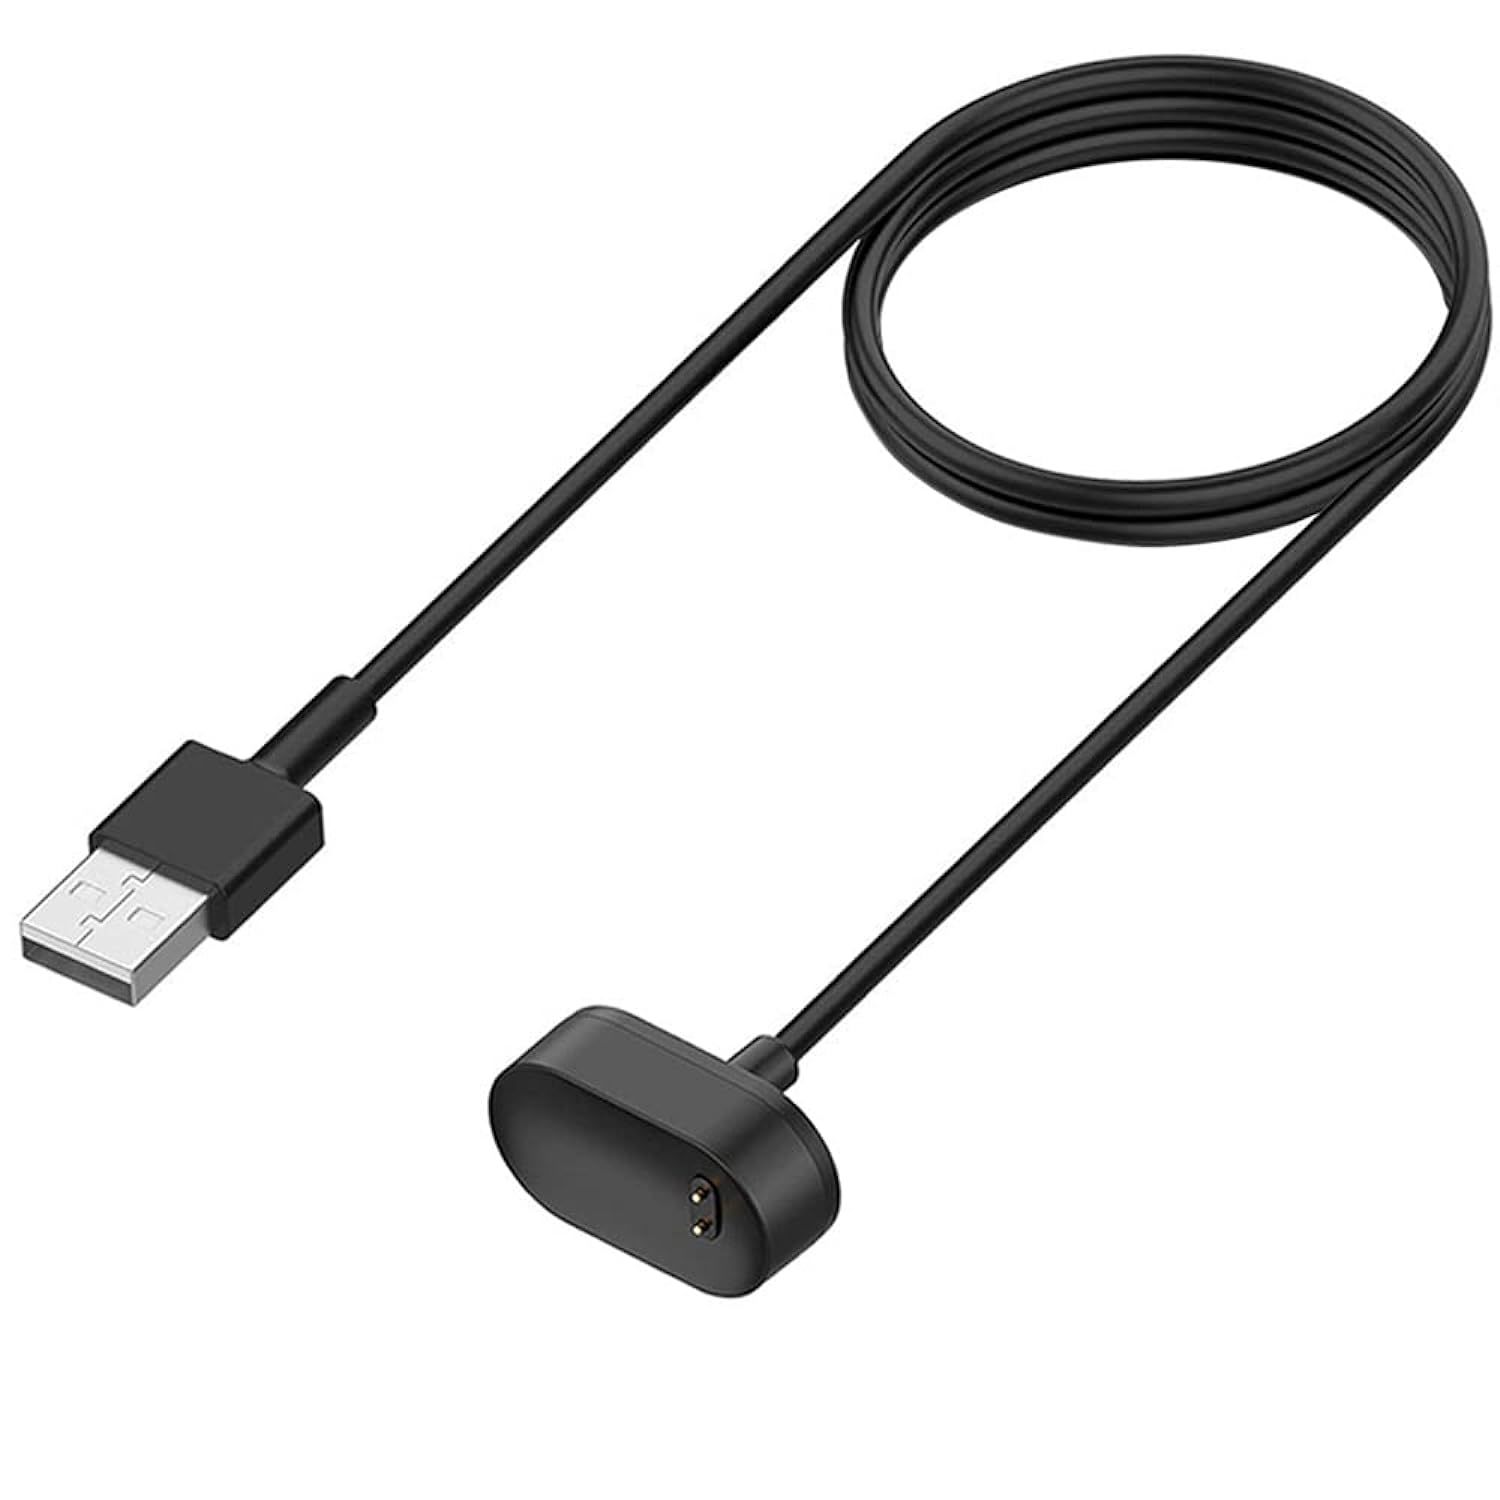 Charger For Fitbit Inspire Hr, Fitbit Inspire, Fitbit Ace 2, Replacement Usb Cha - $14.99